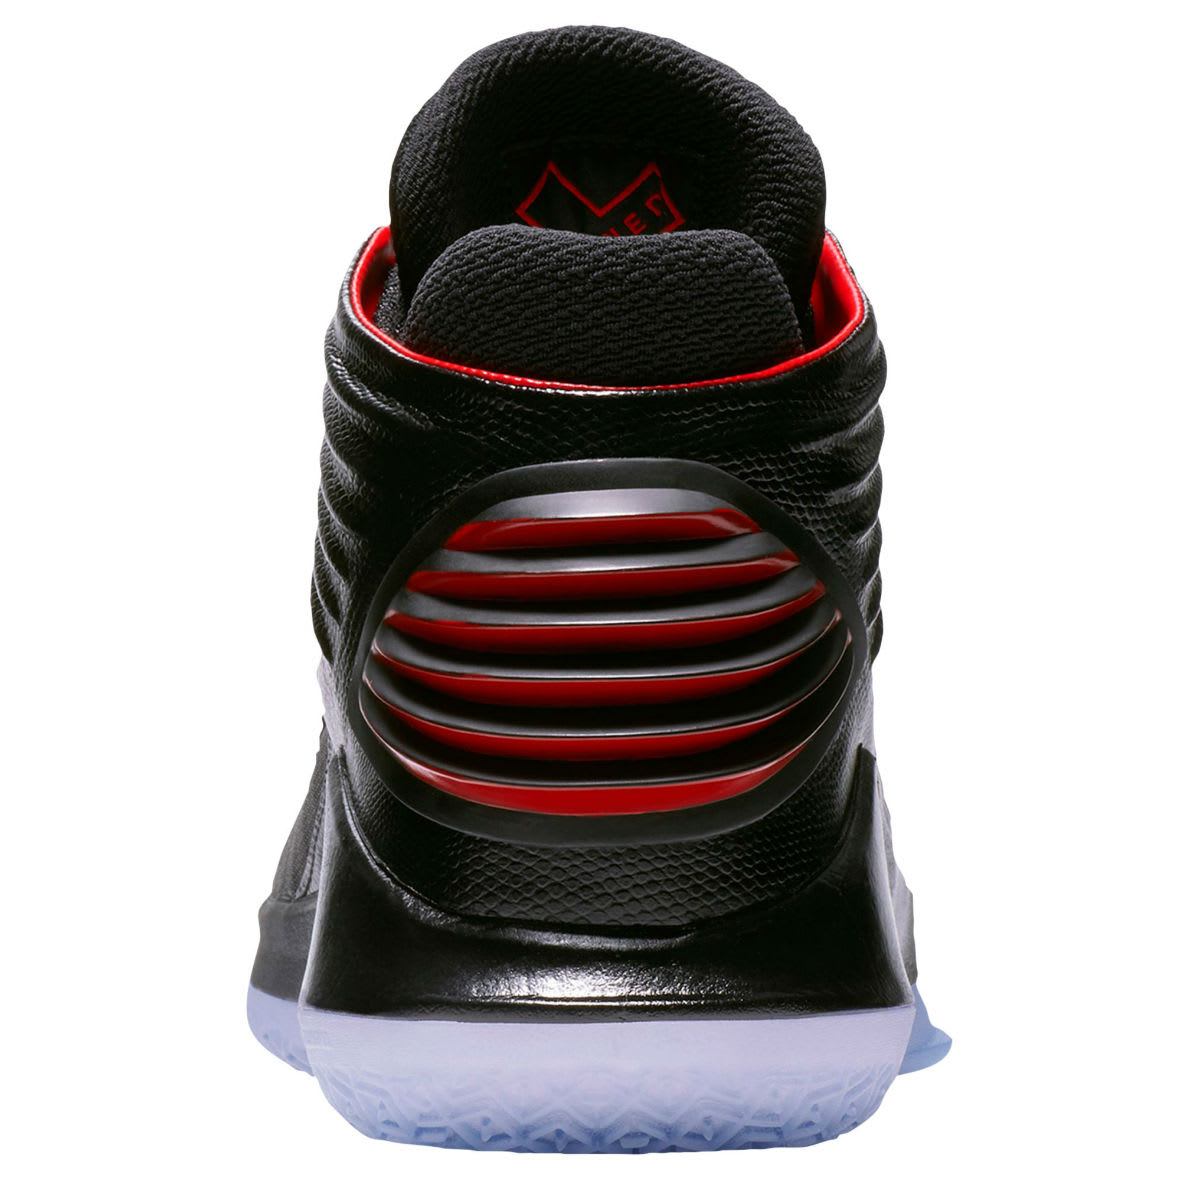 New Images & Release Date For Air Jordan 32 'MJ Day' AA1253-001 | Sole